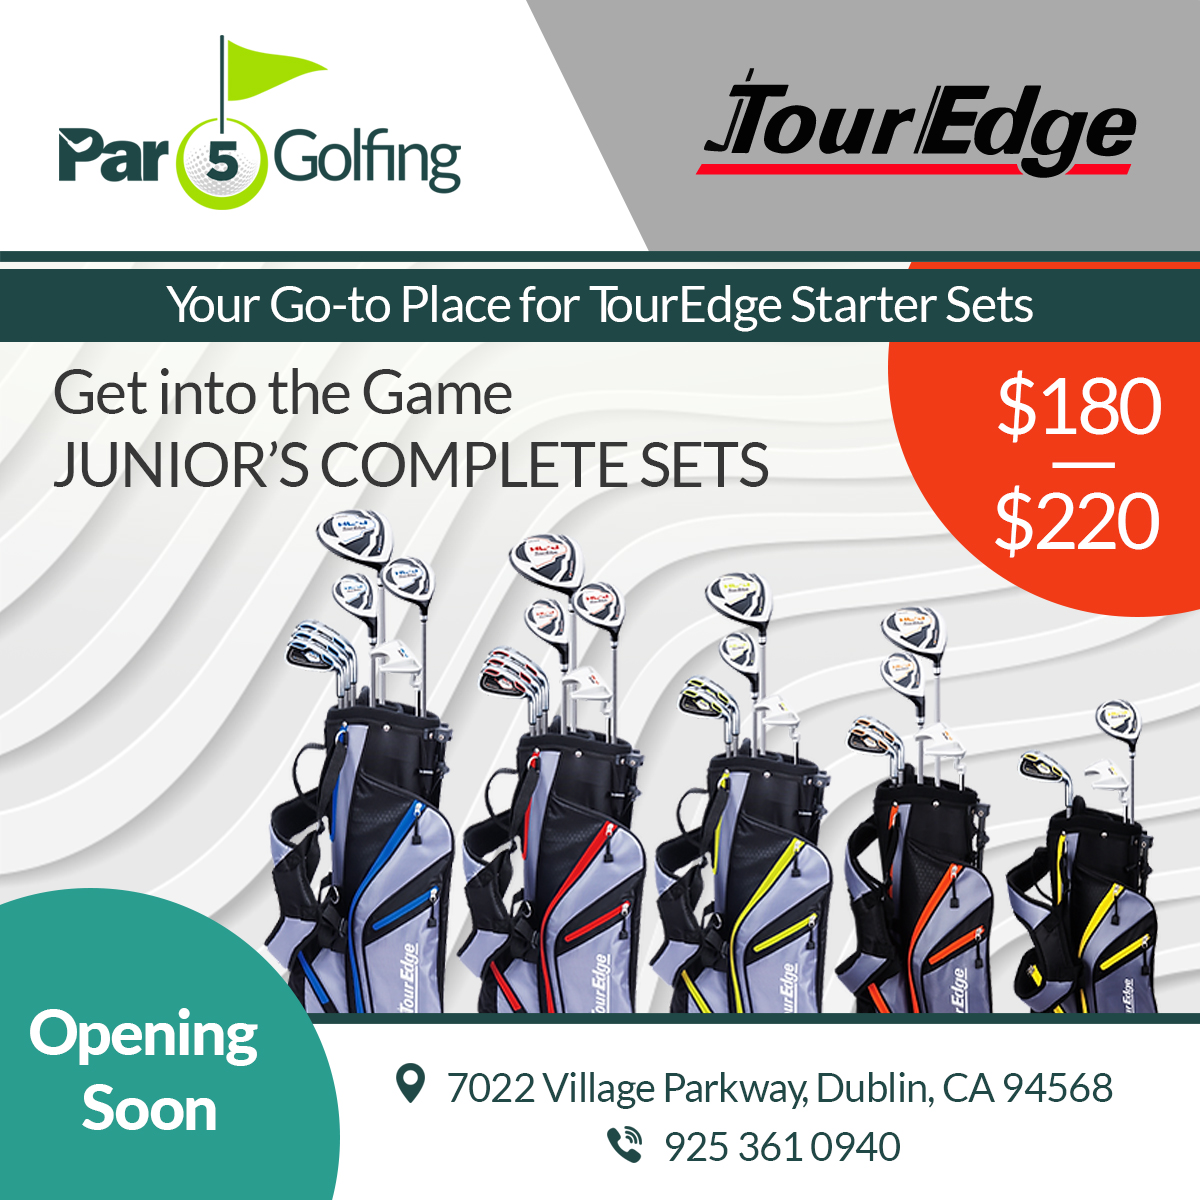 #Par5Golfing is going to be your primary go-to shop for #TourEdge #golfset in Dublin, CA. Opening soon. Stay tuned! 

#golf #golfing #golfevent #golftravel #golfclub #golfpro #golfer #golffun #golftraining #golfstore #PGA #tour #masters